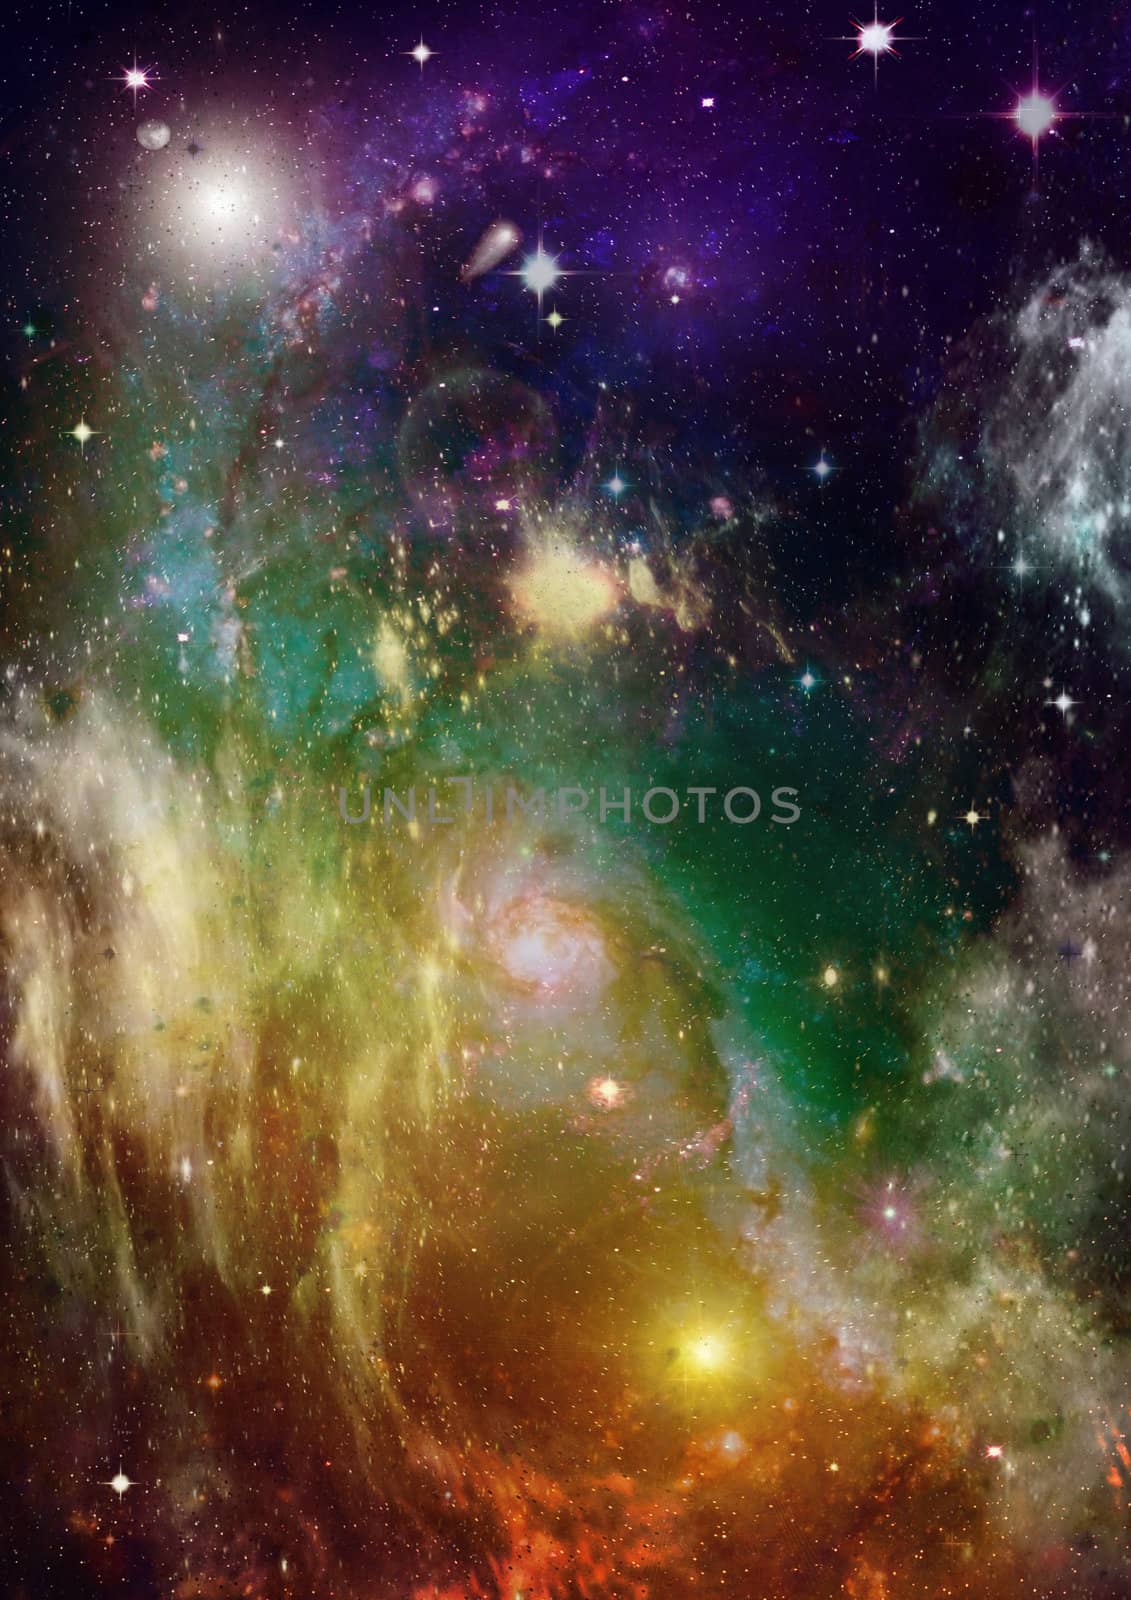 Space stars and nebula by richter1910